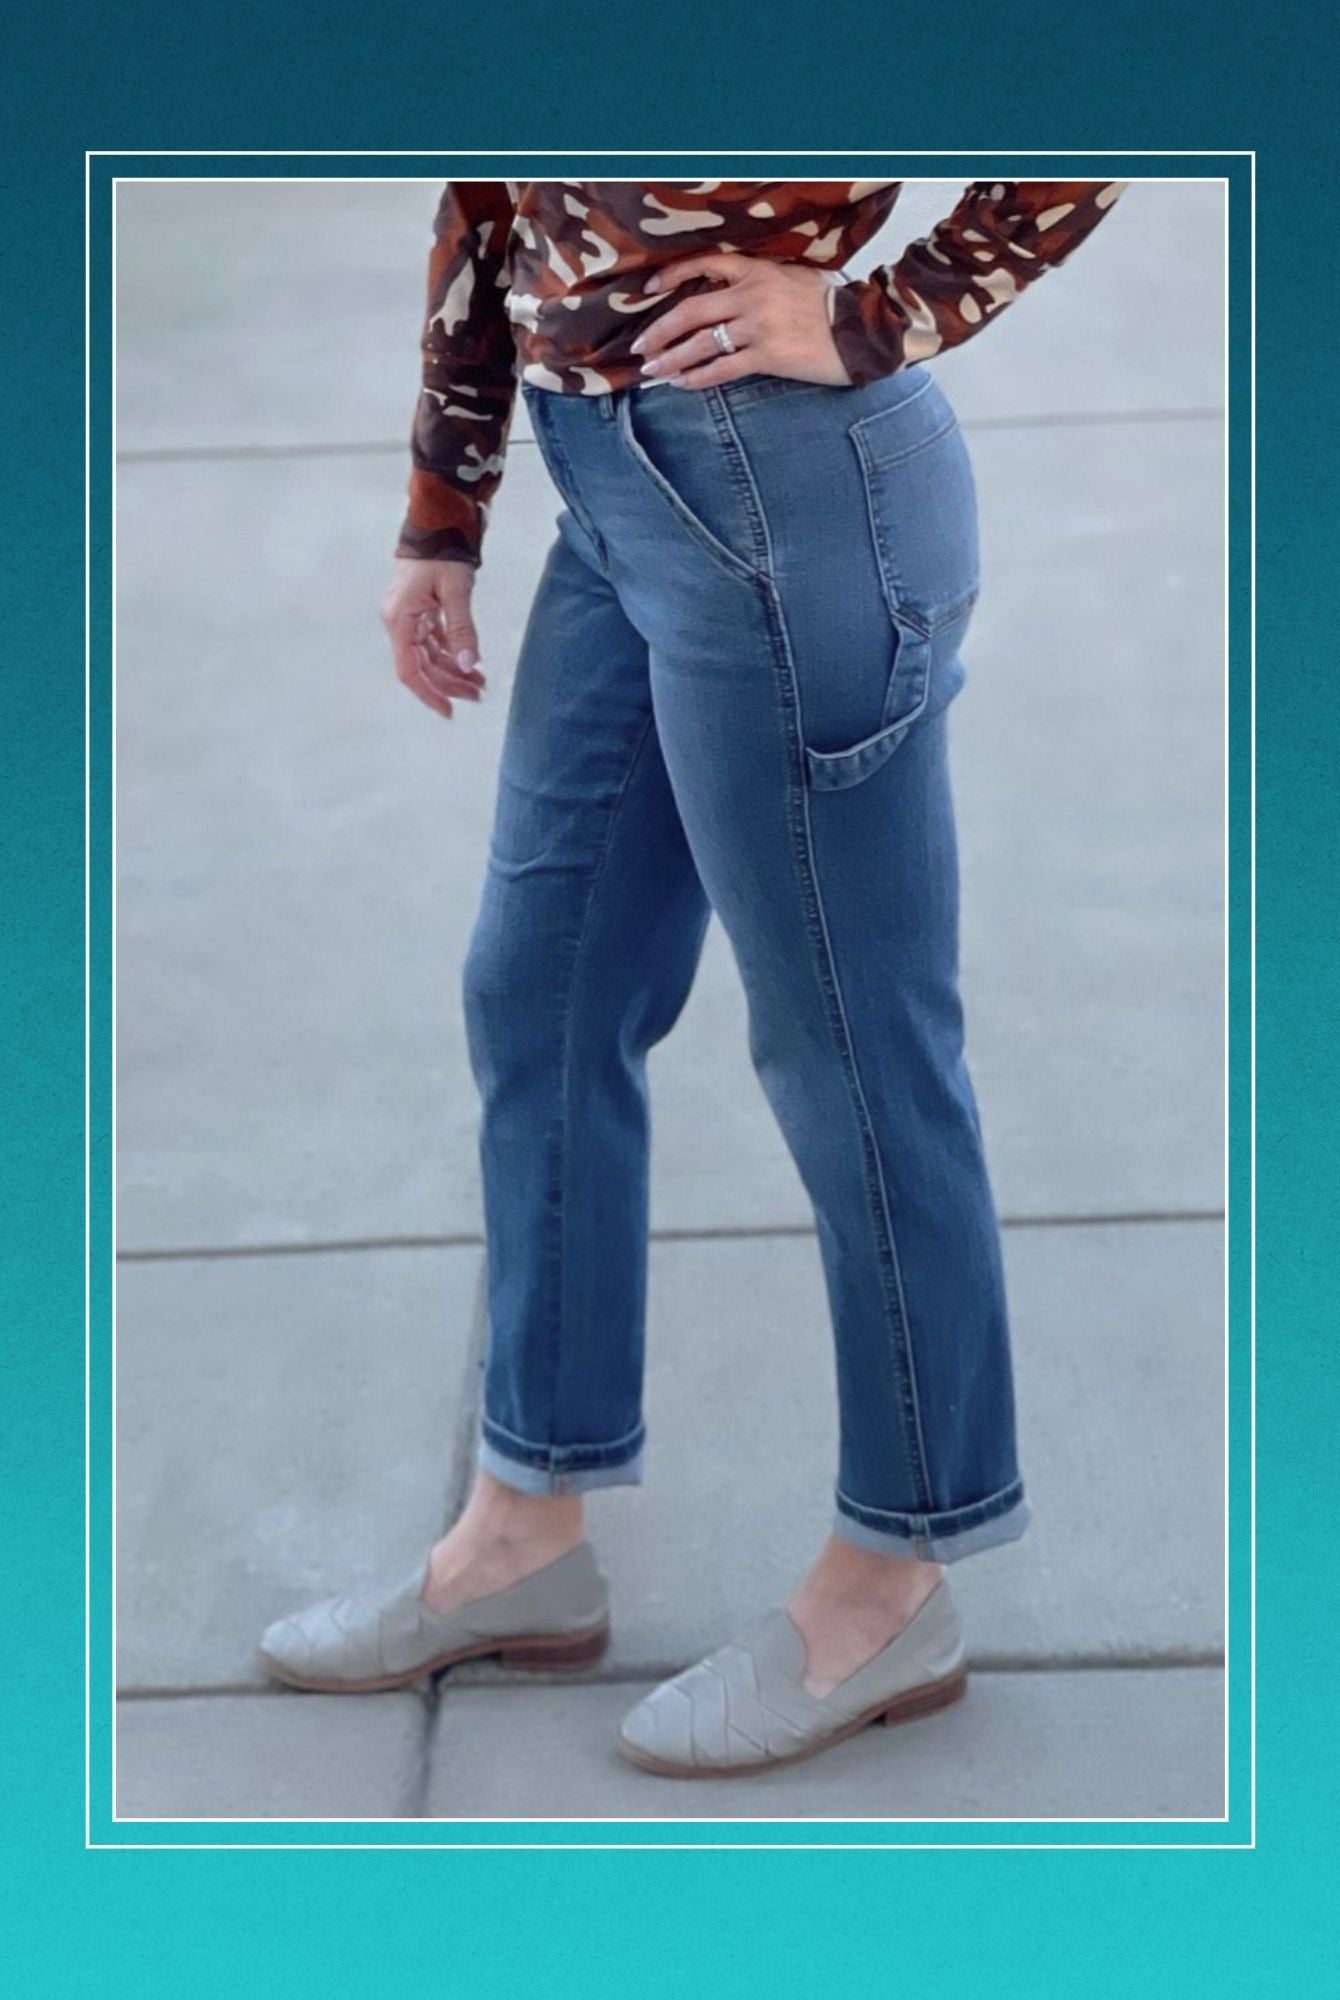 Shop Our Women's Jeans and Denim Collection with Stay Foxy Boutique | A women's online fashion boutique located in Florissant, Missouri